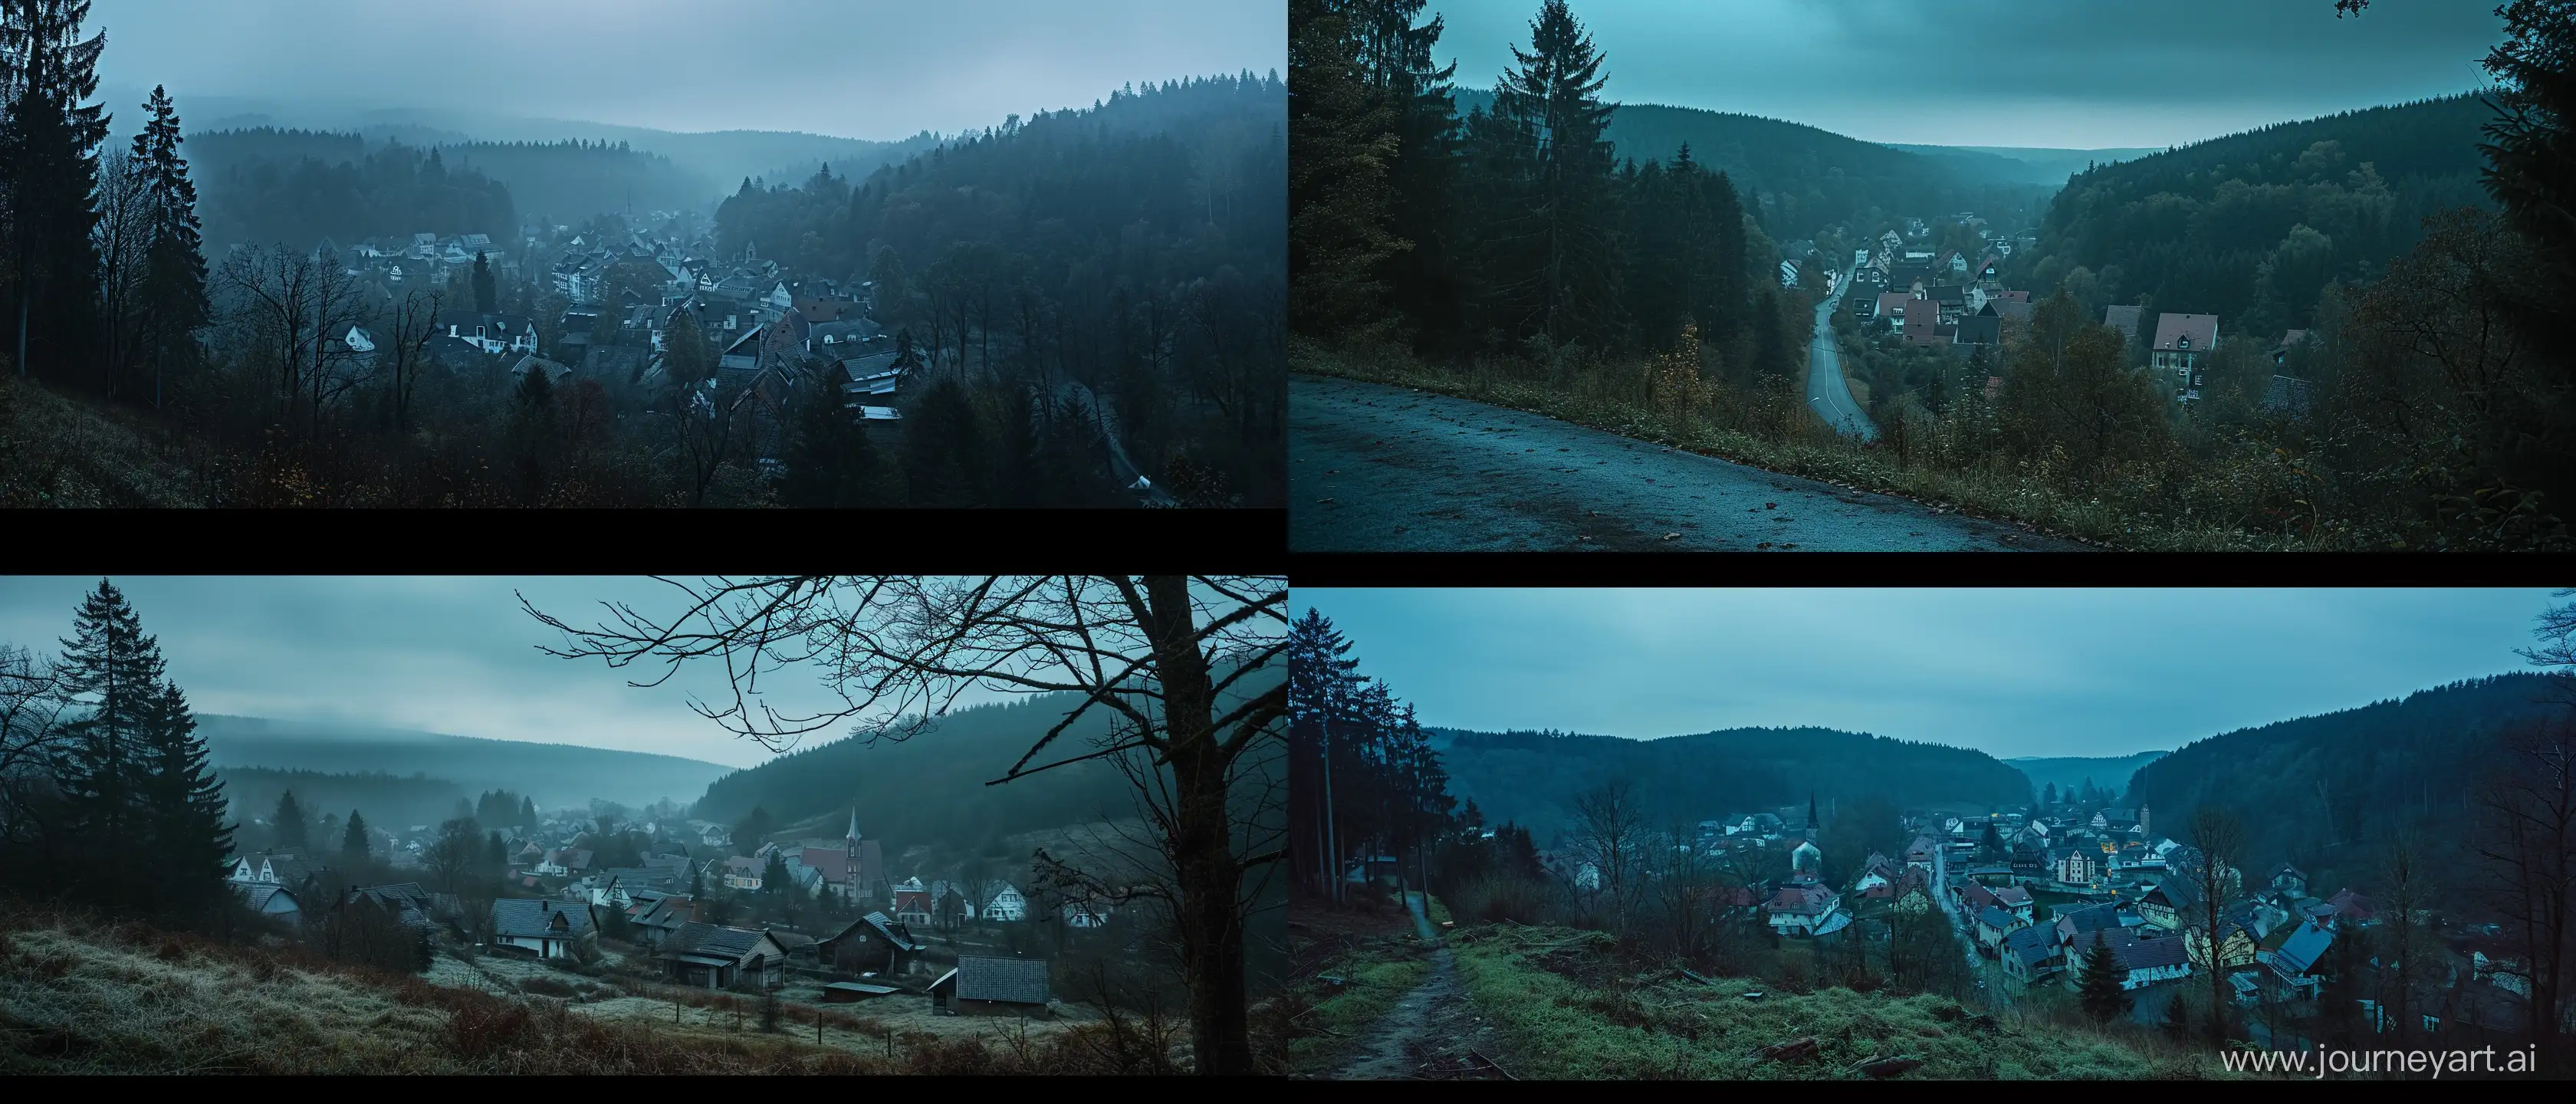 Moody-Panoramic-Landscape-Twilight-in-a-German-Town